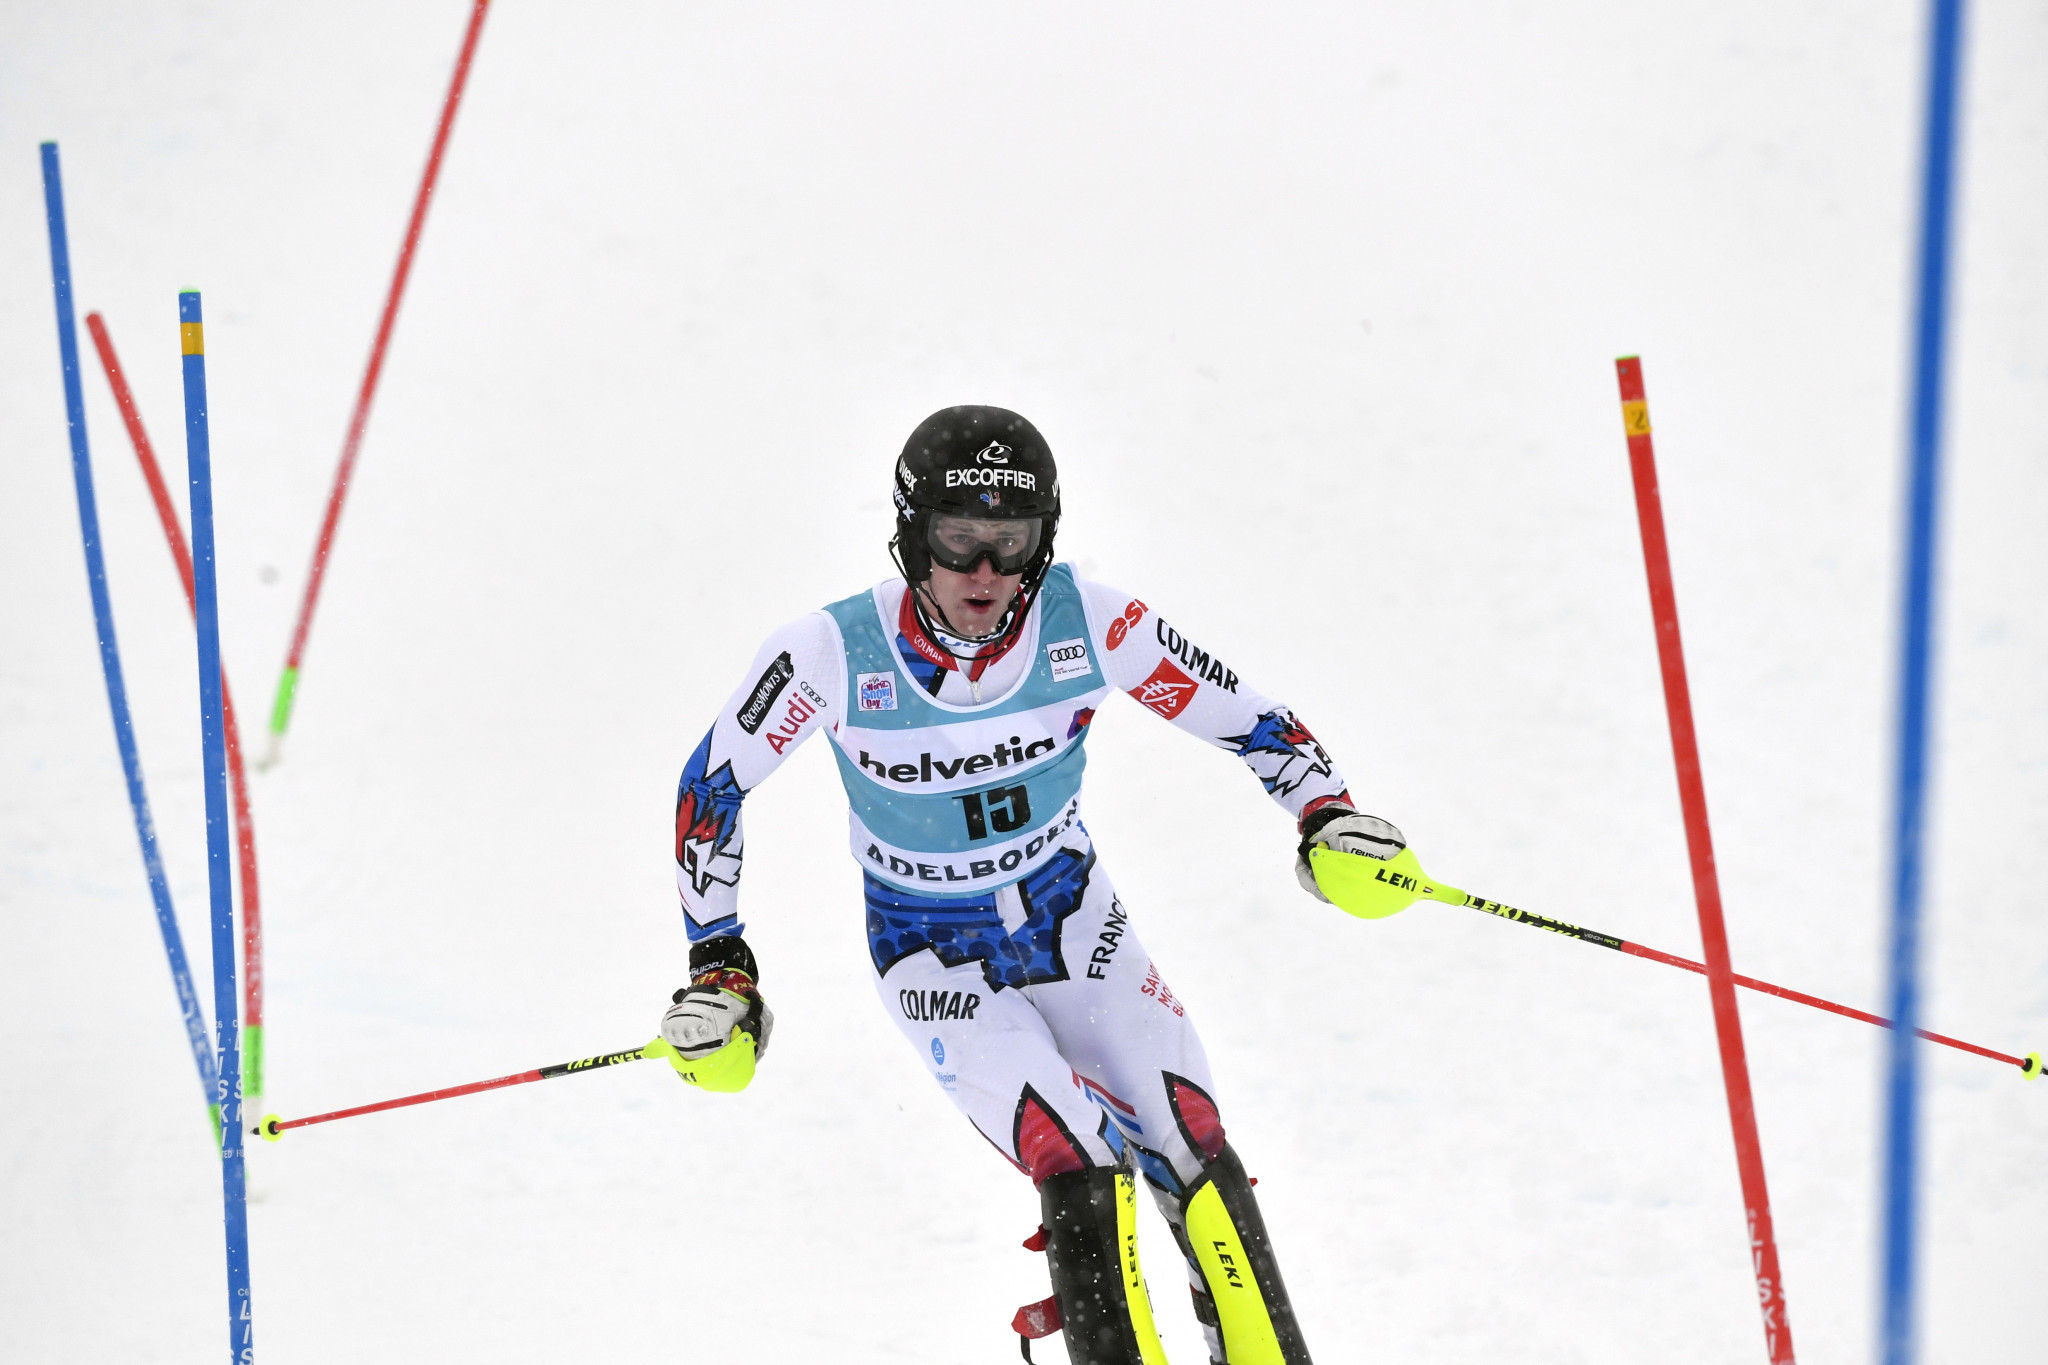 Clement Noel ended as the runner-up in Adelboden ©Getty Images